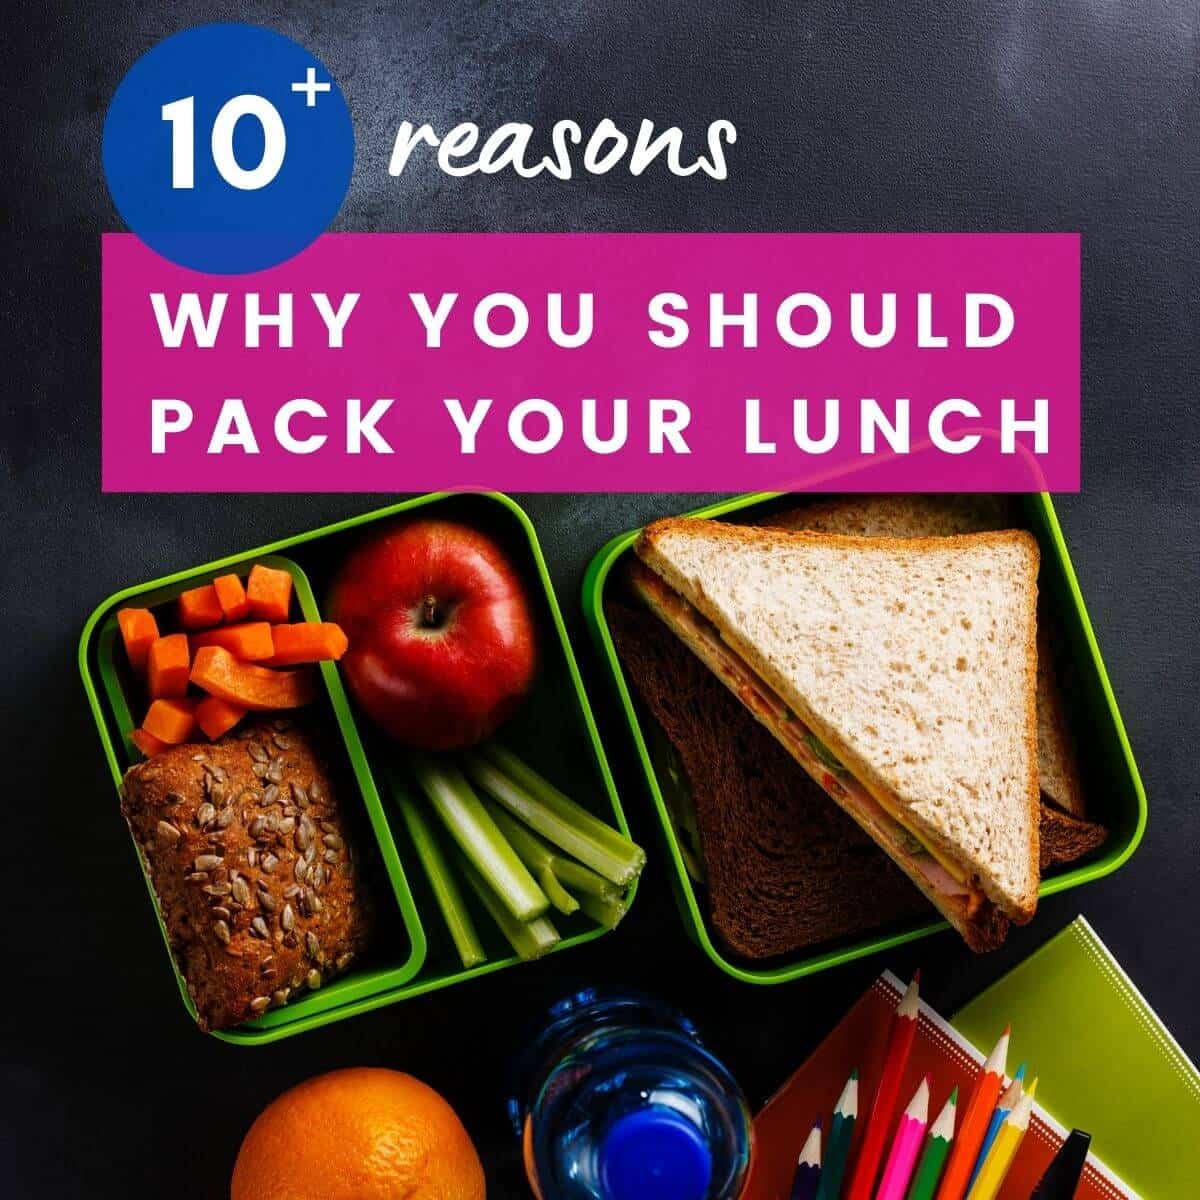 10+ Reasons Why You Should Pack Lunch for Work or School